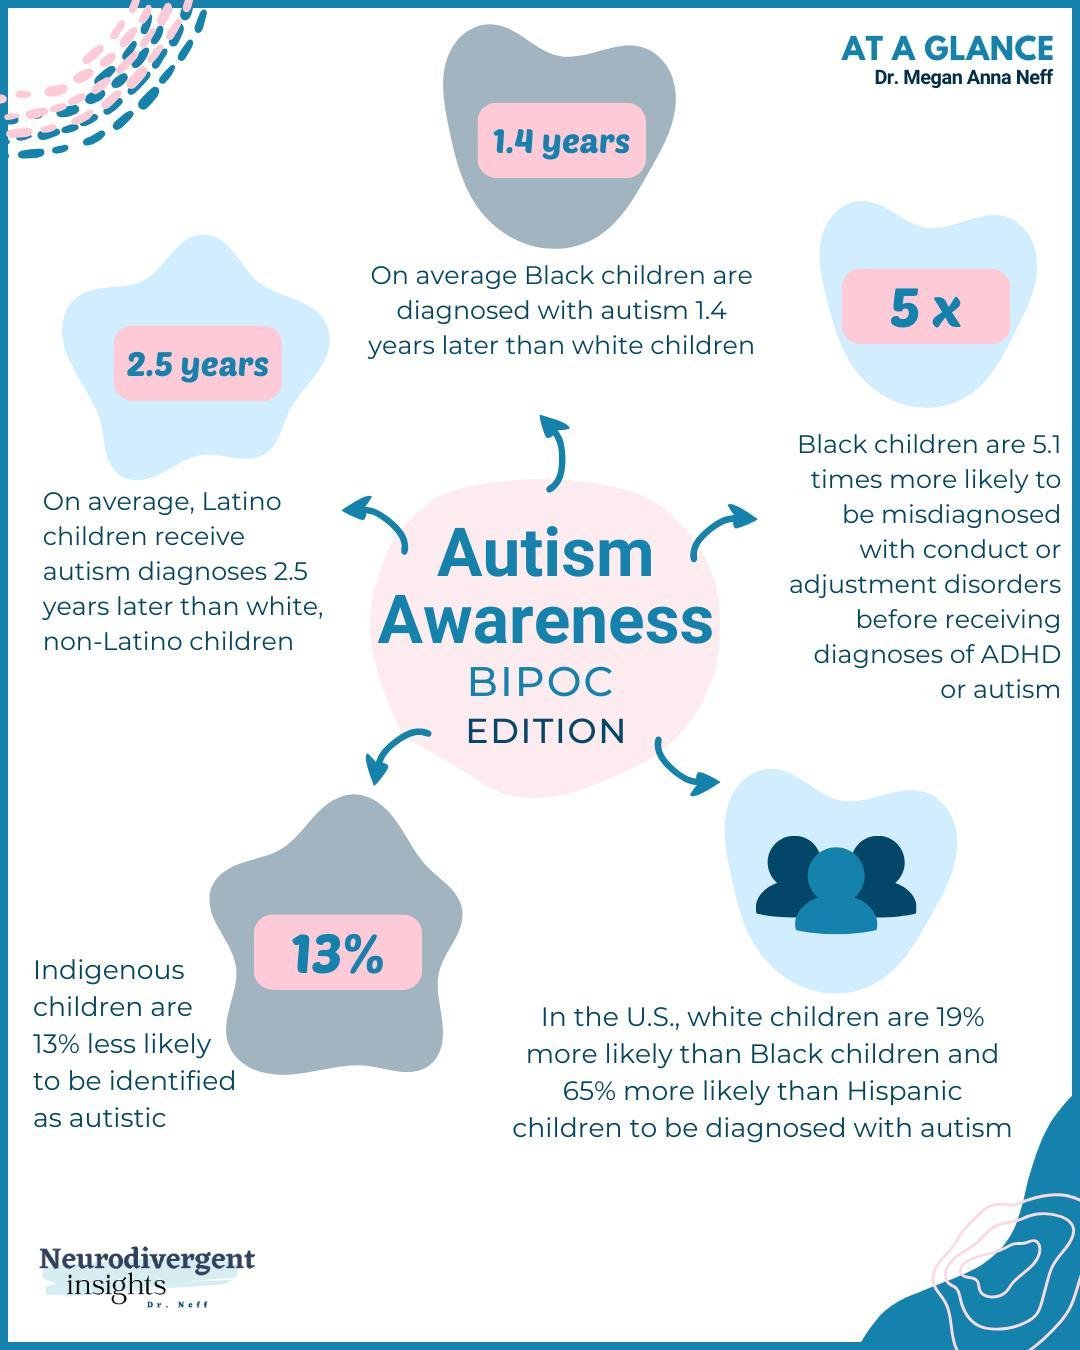 Part 3 of #AutismAwareness series. ⁠
⁠
On April 2 this year, President Biden officially recognized the date as World Autism Acceptance Day, a change that marks a shift away from the previous focus on Autism Awareness Month. This shift, long advocated